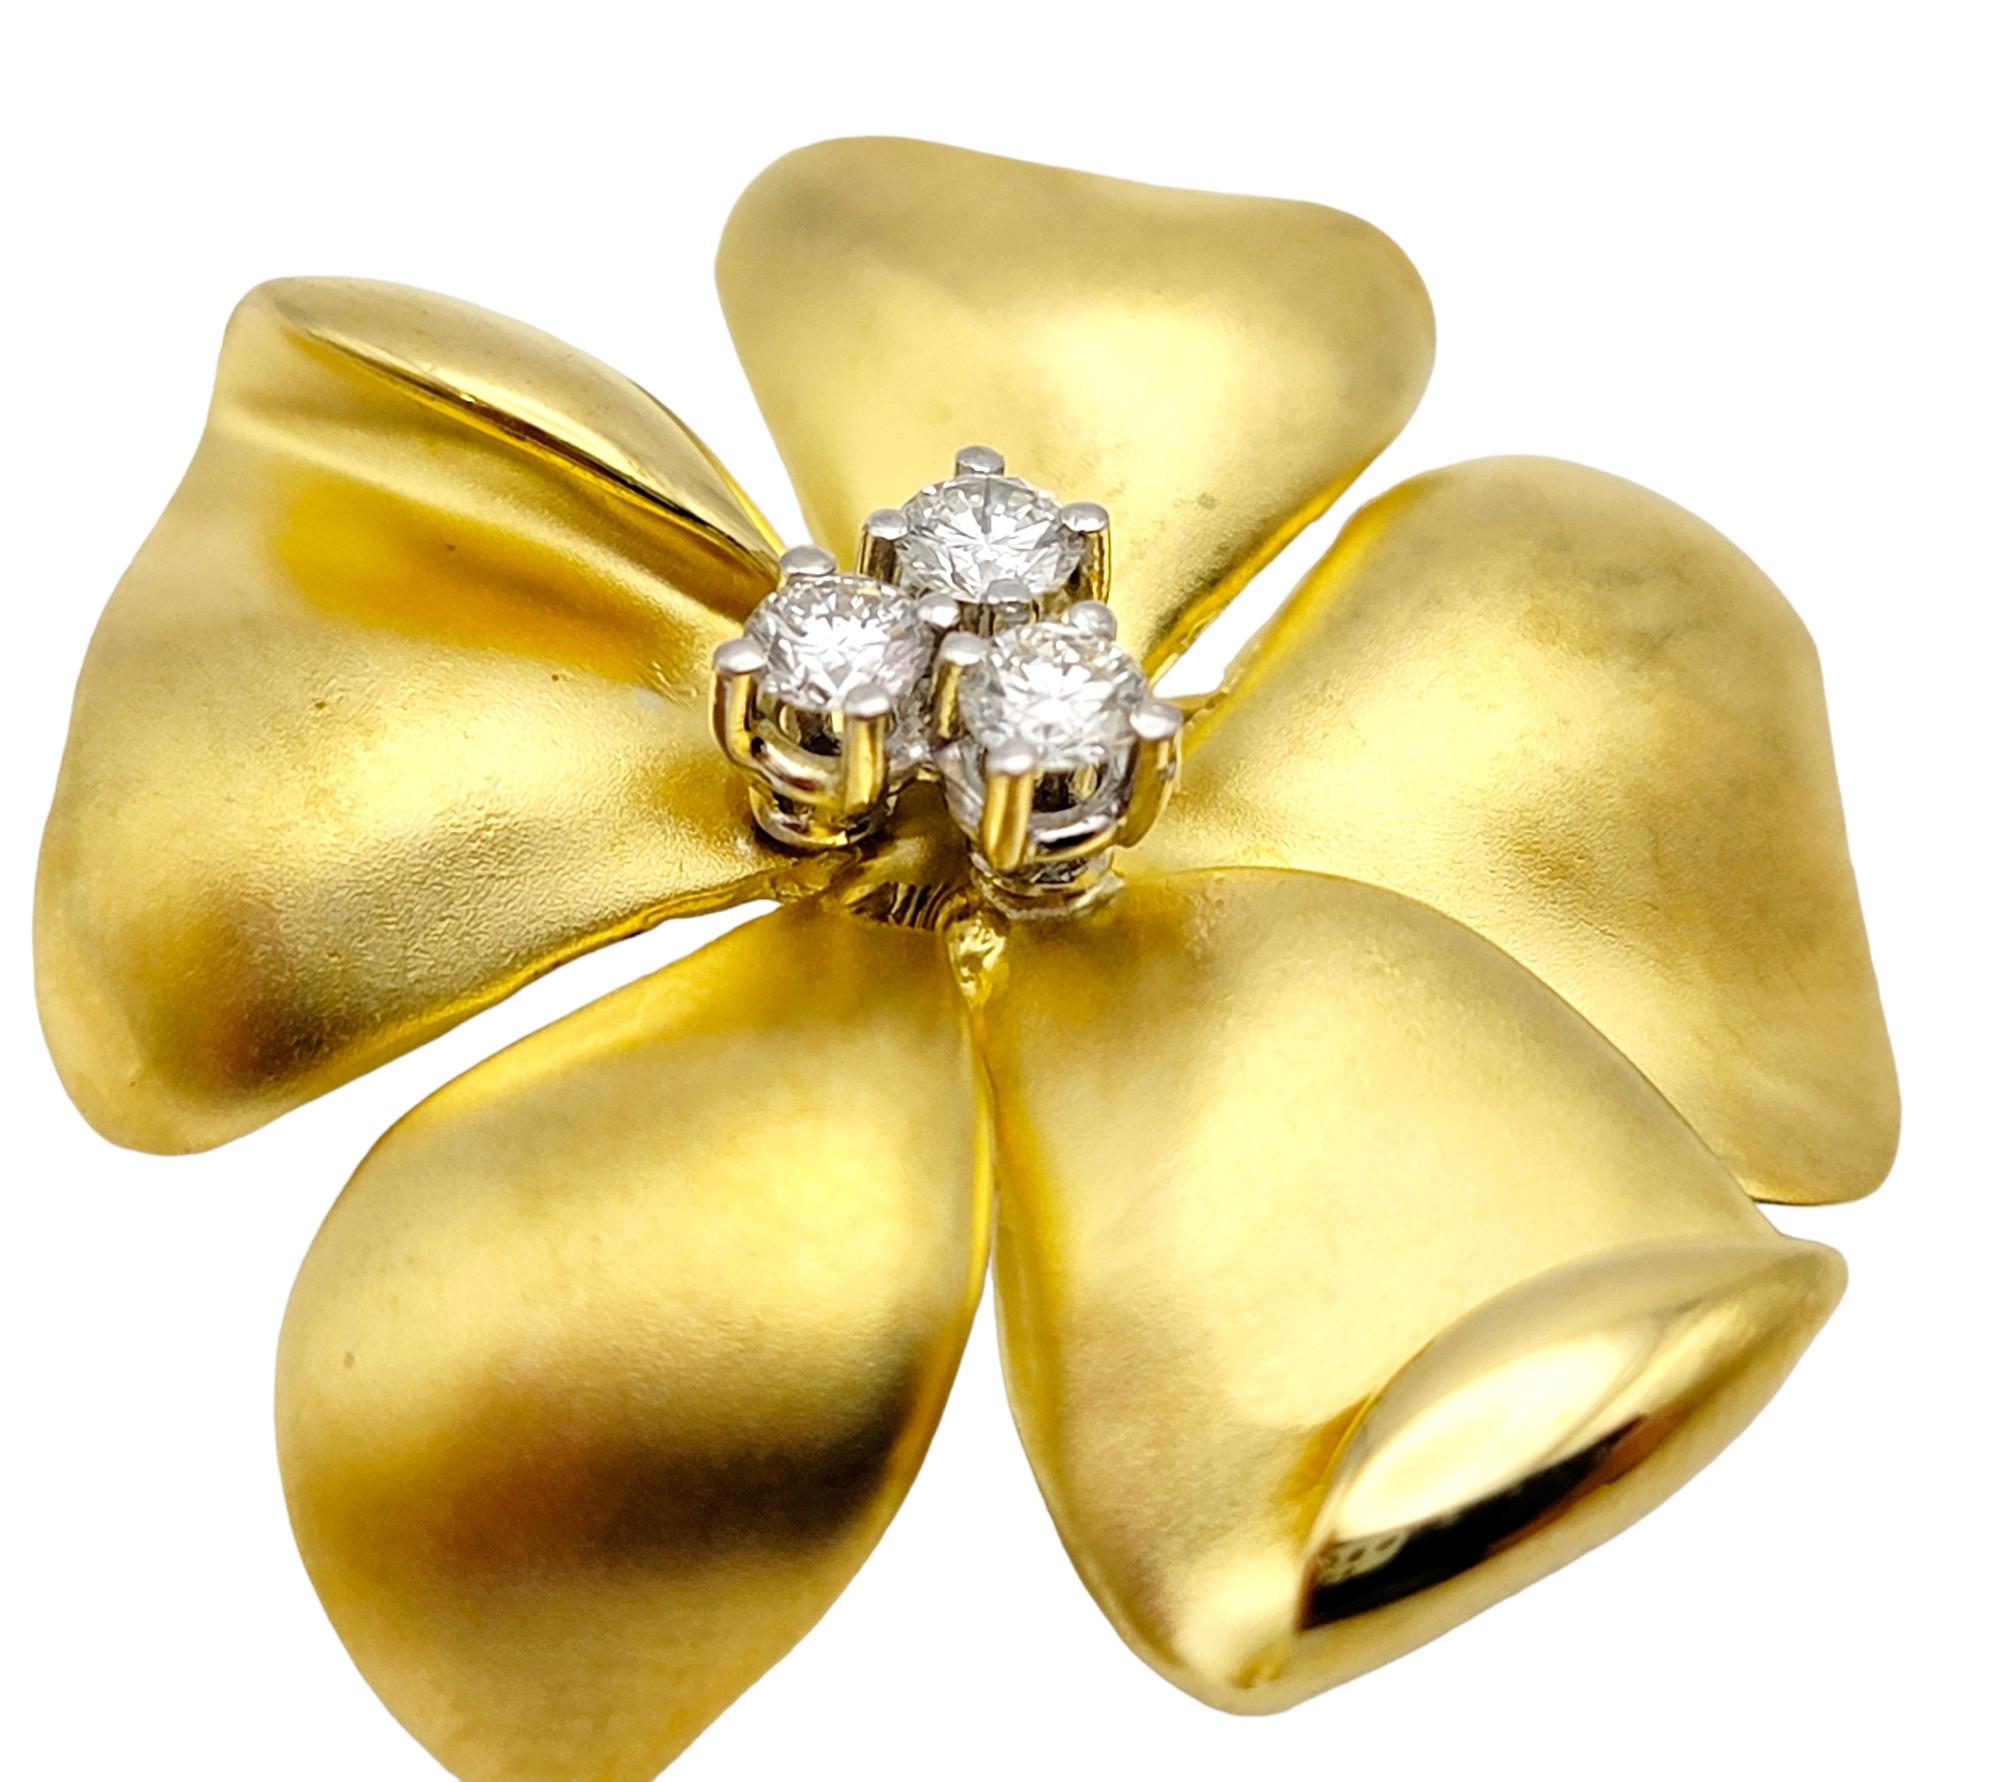 Brushed 18 Karat Yellow Gold Flower Pin / Brooch with Round Diamond Accents For Sale 1